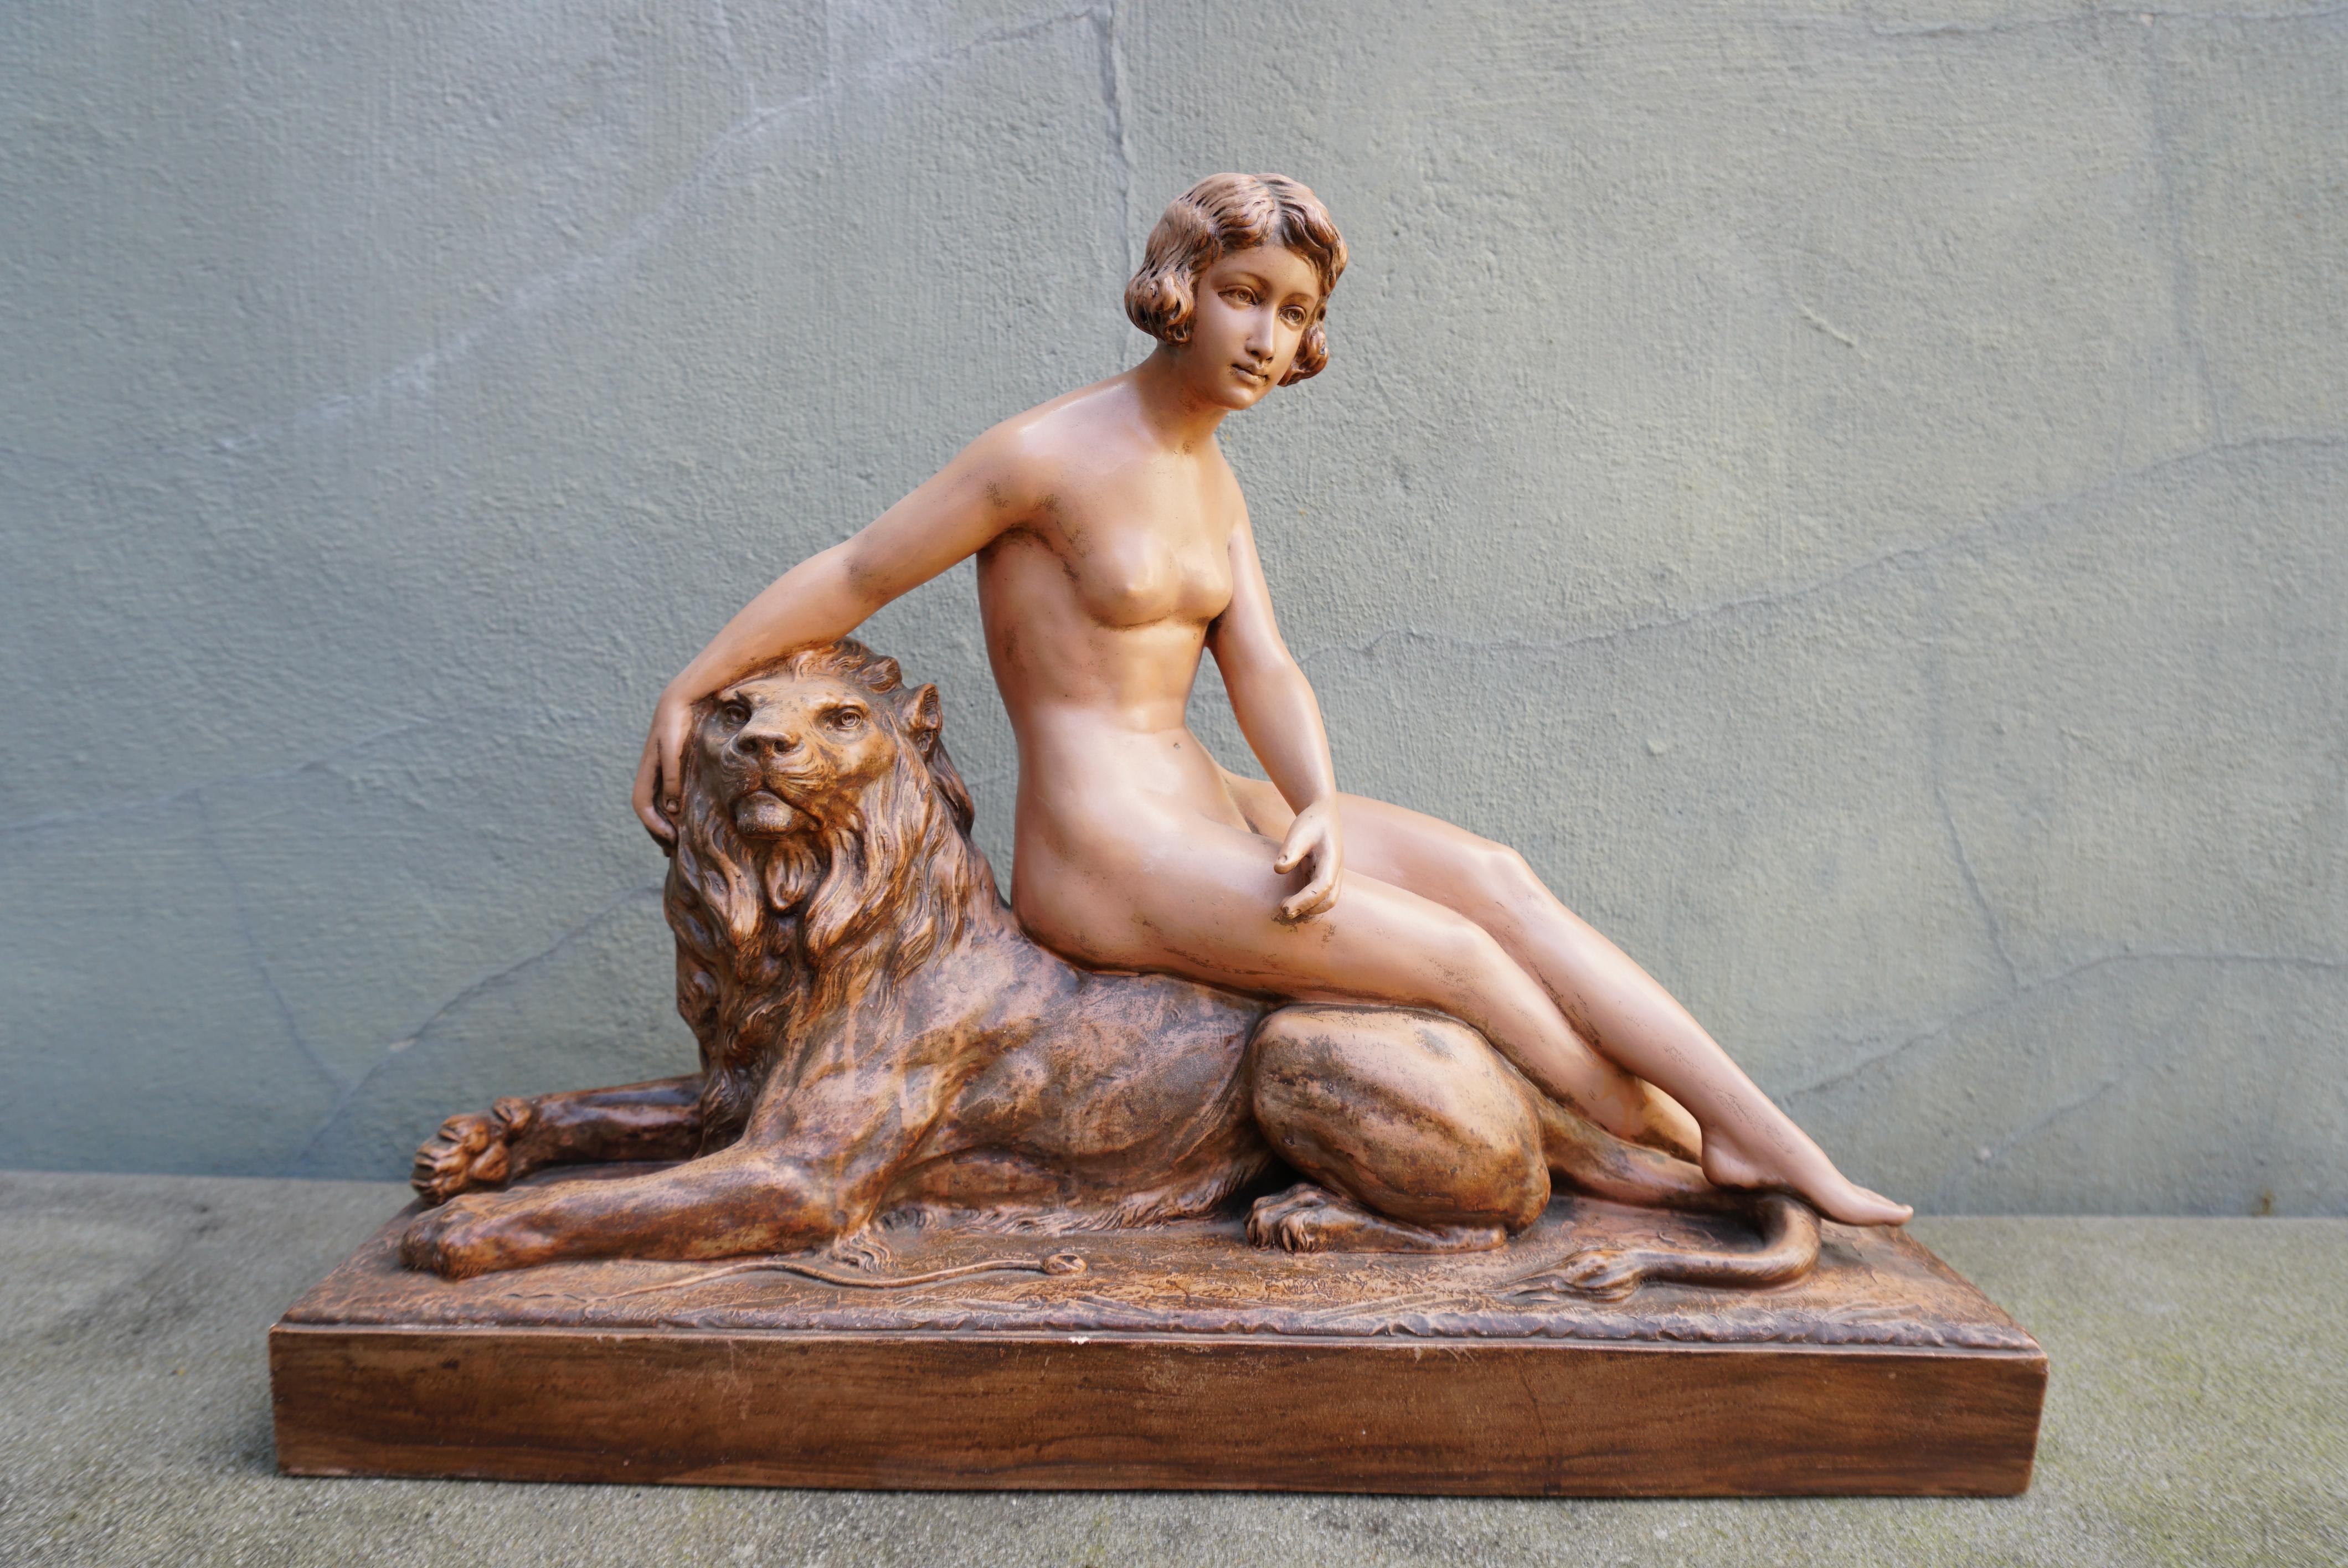 Plaster sculpture of a nude with Lion.
Signed 'H.Heusers'.

HERMAN HEUSERS (1872-1938)